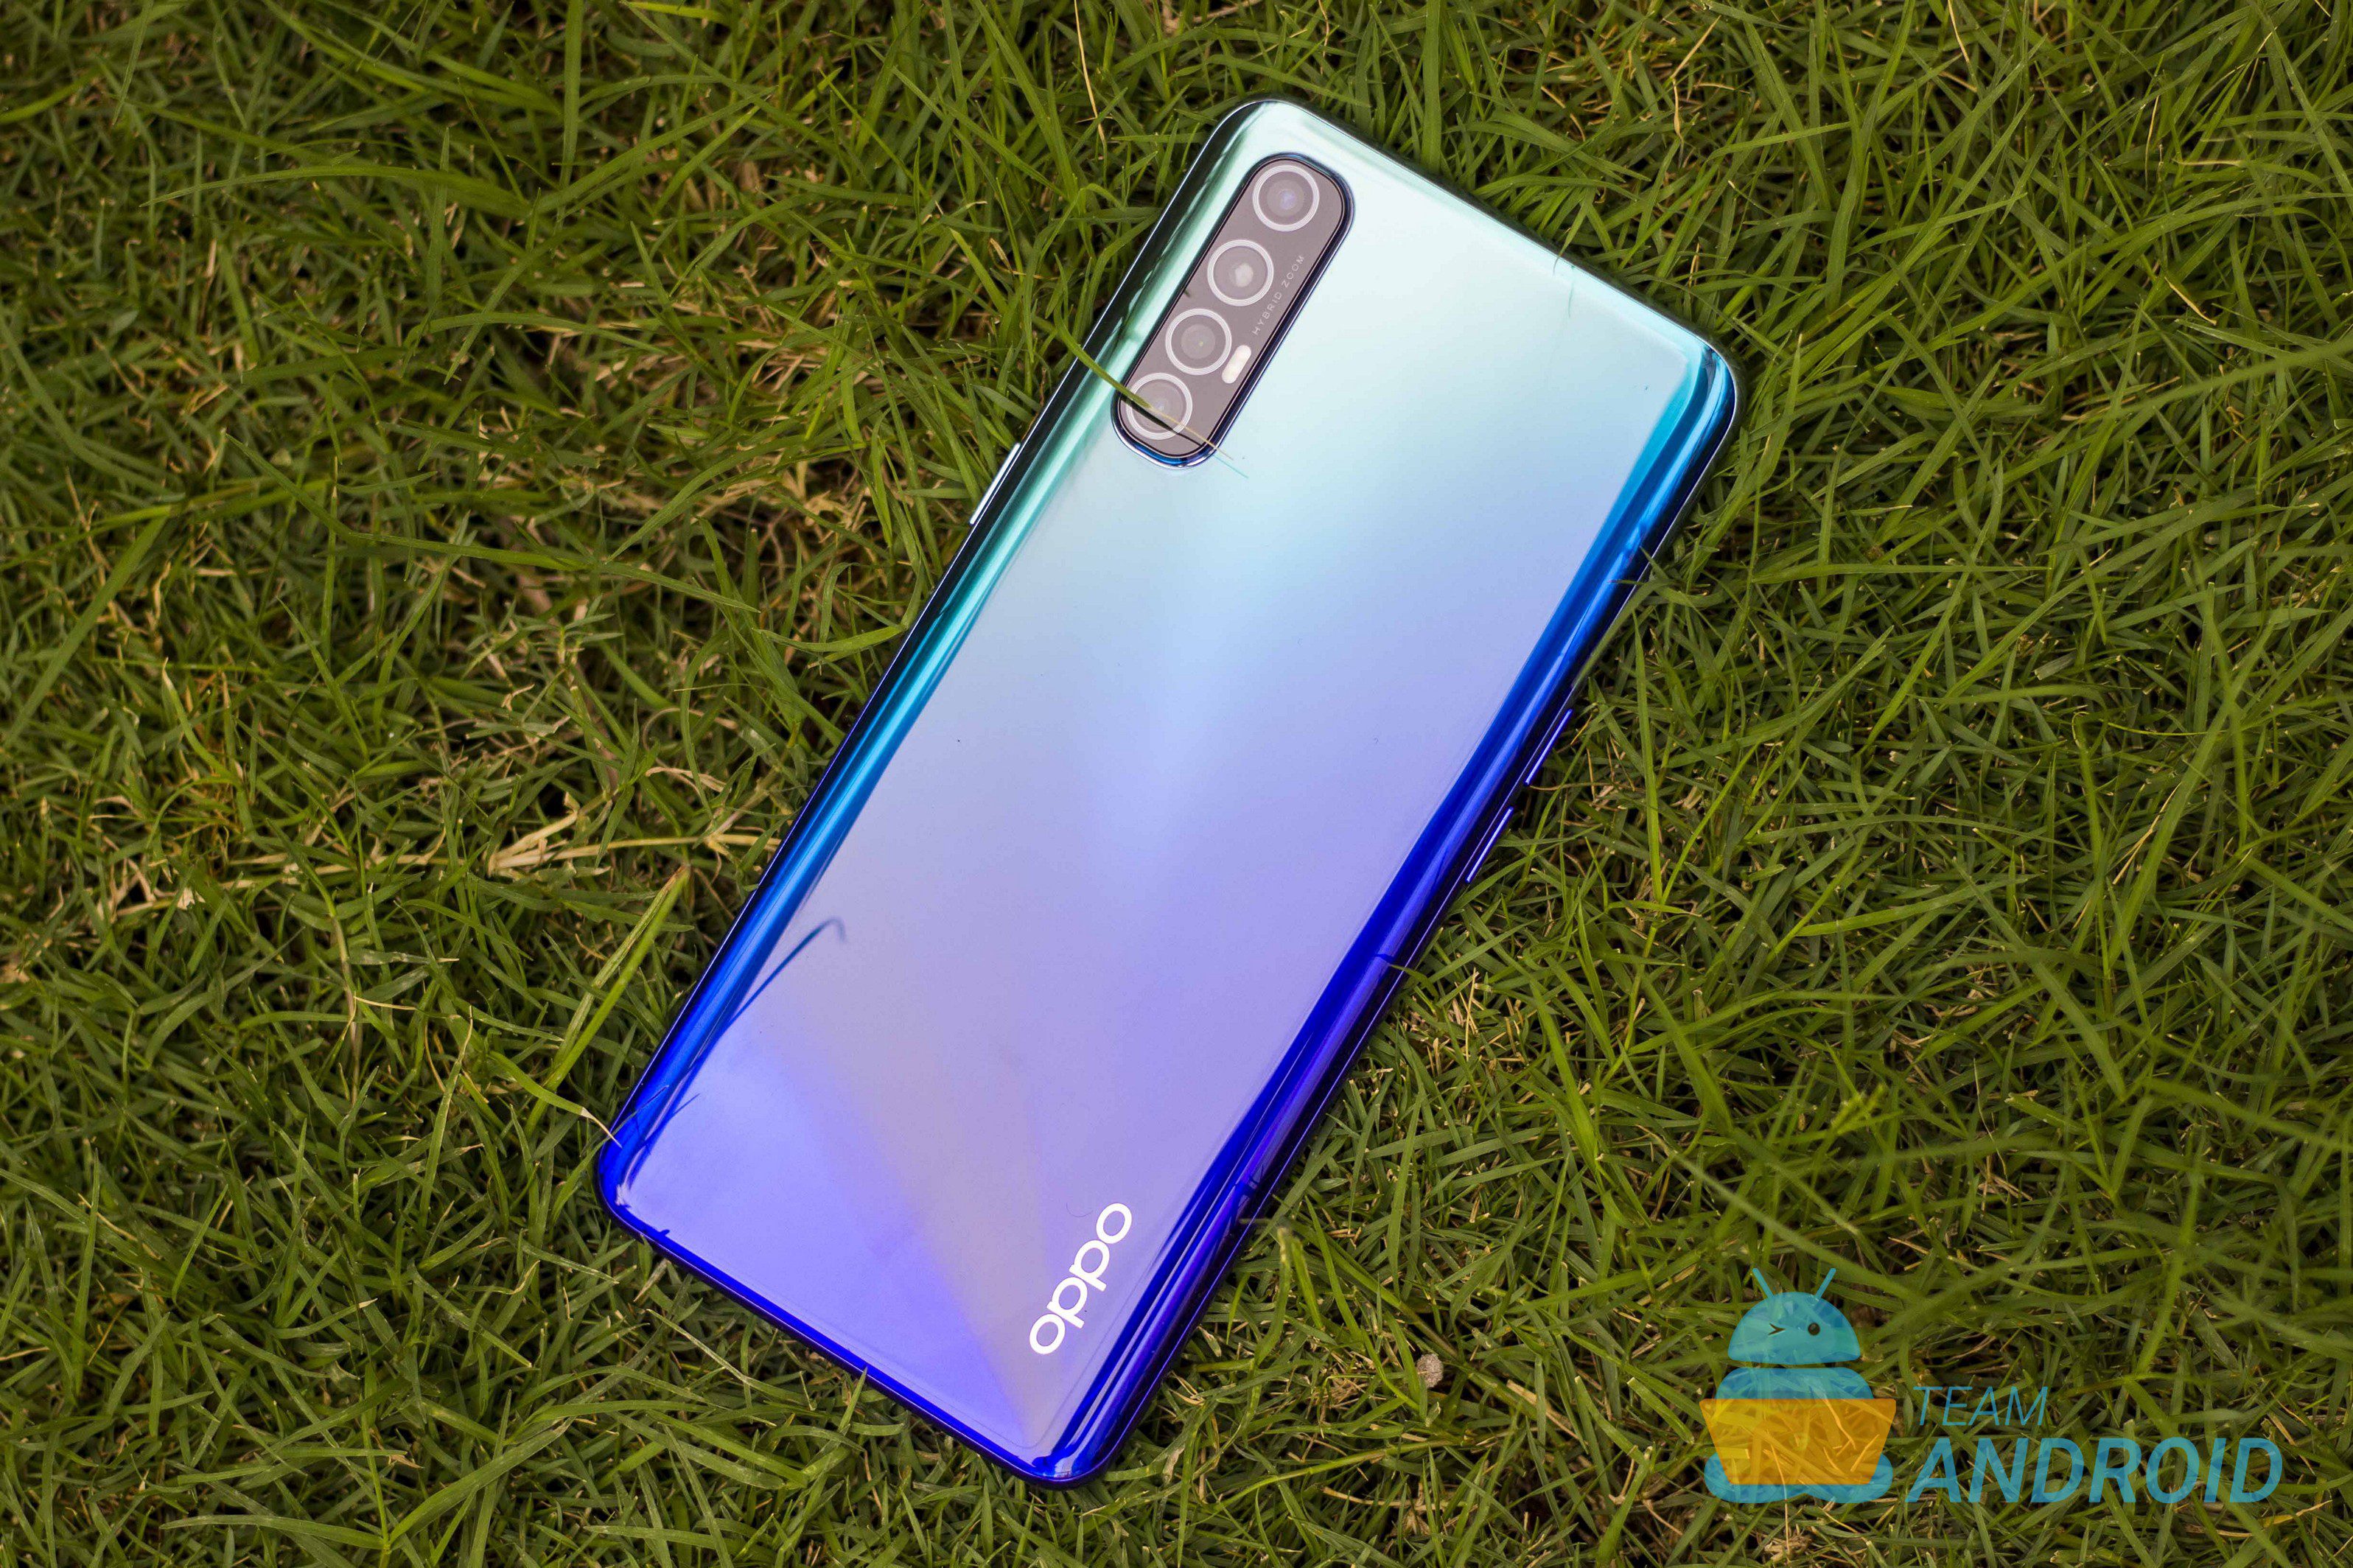 Oppo Reno 3 Pro Review: Is This a Midrange Flagship Phone? 36